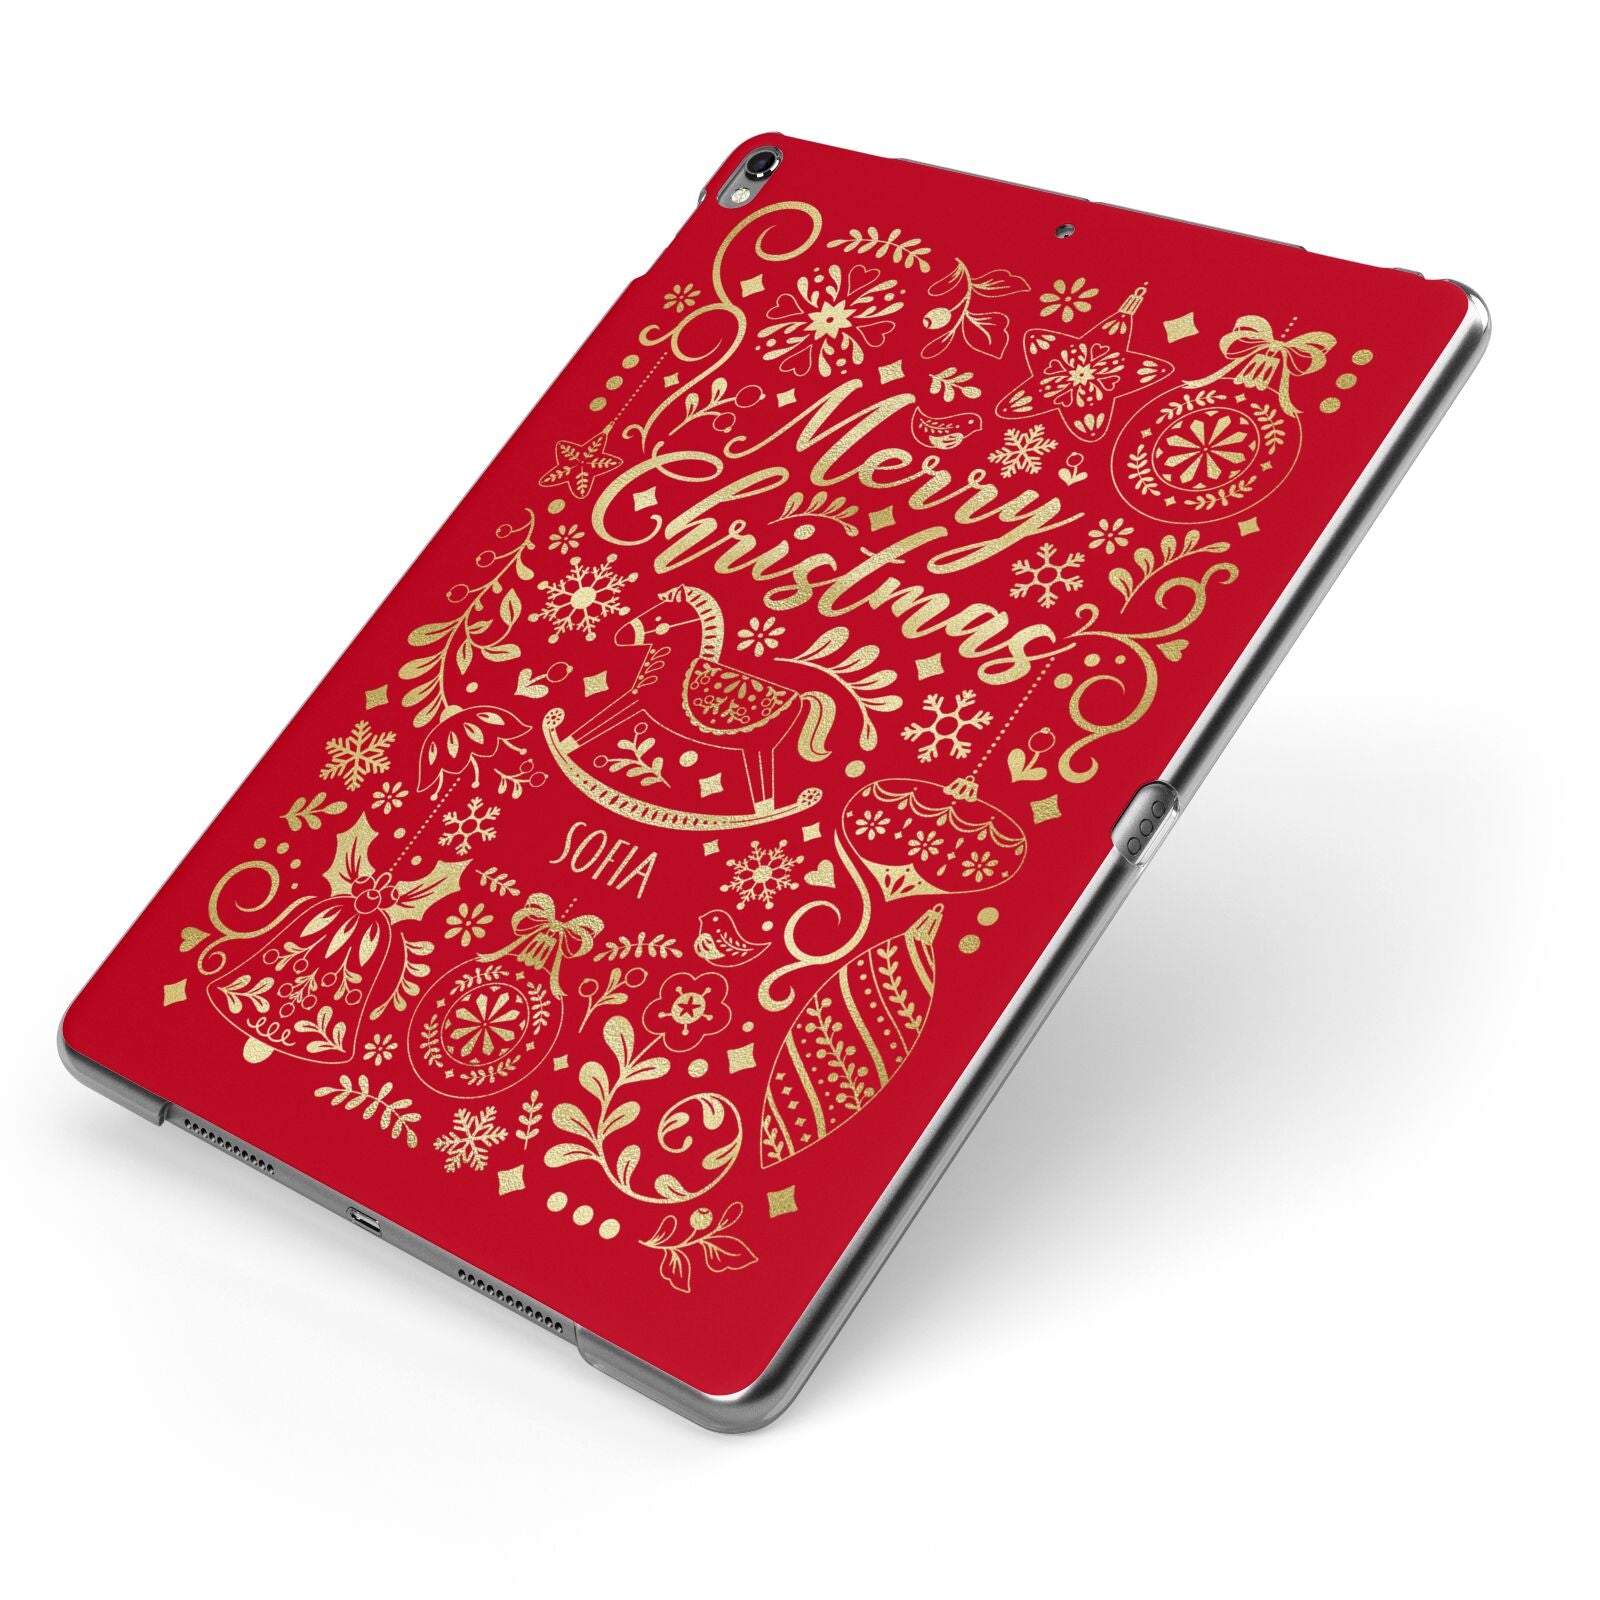 Merry Christmas Personalised Apple iPad Case on Grey iPad Side View